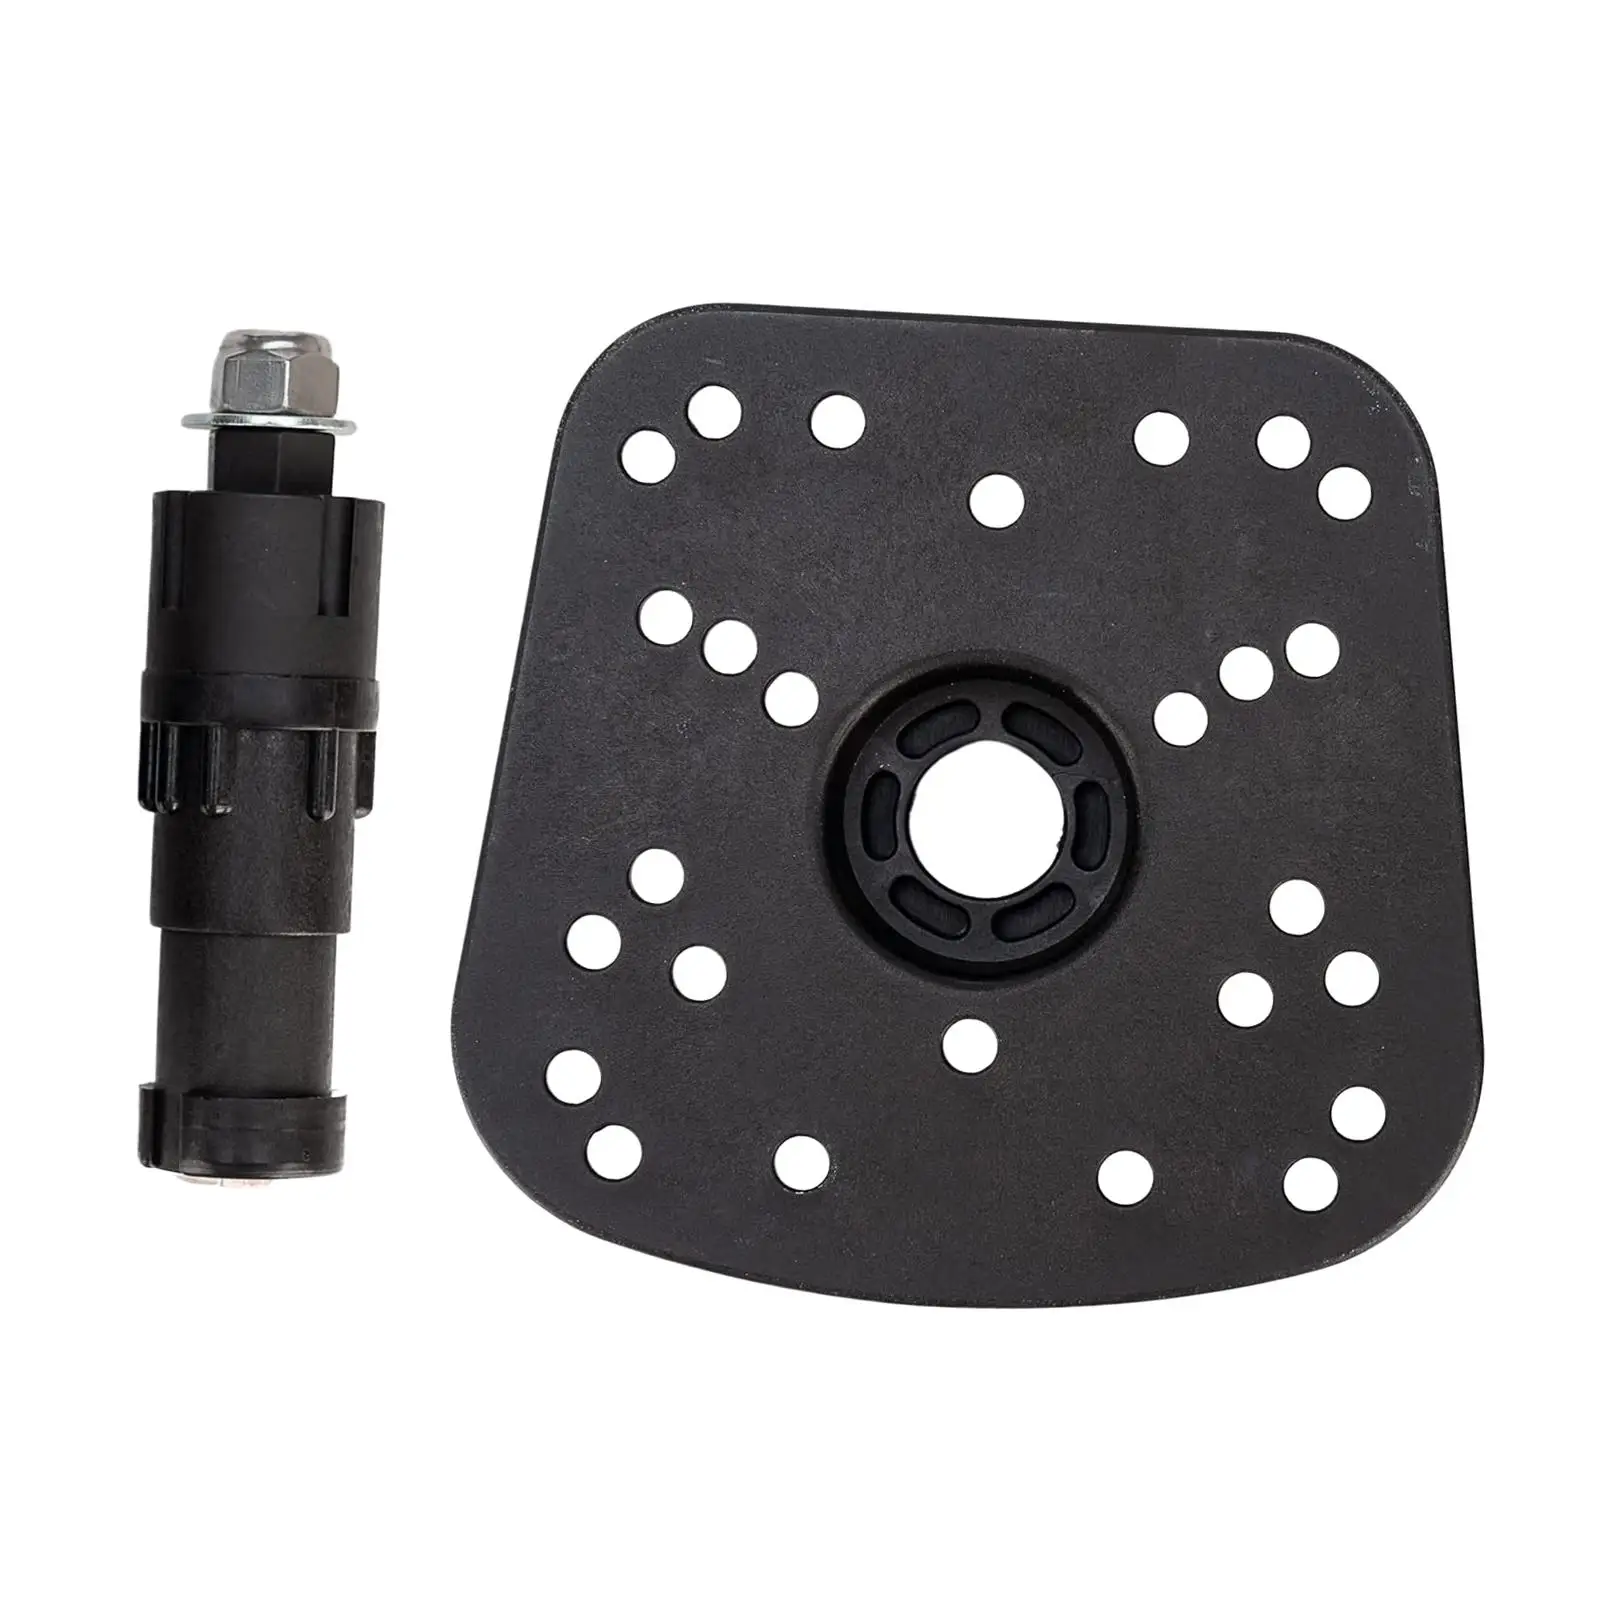 

Fishfinder Mount 360 Degree Swivel Fishing Finding Device Mounting Plate Holder Fish Finder Mount Support Kayak Boat Accessories